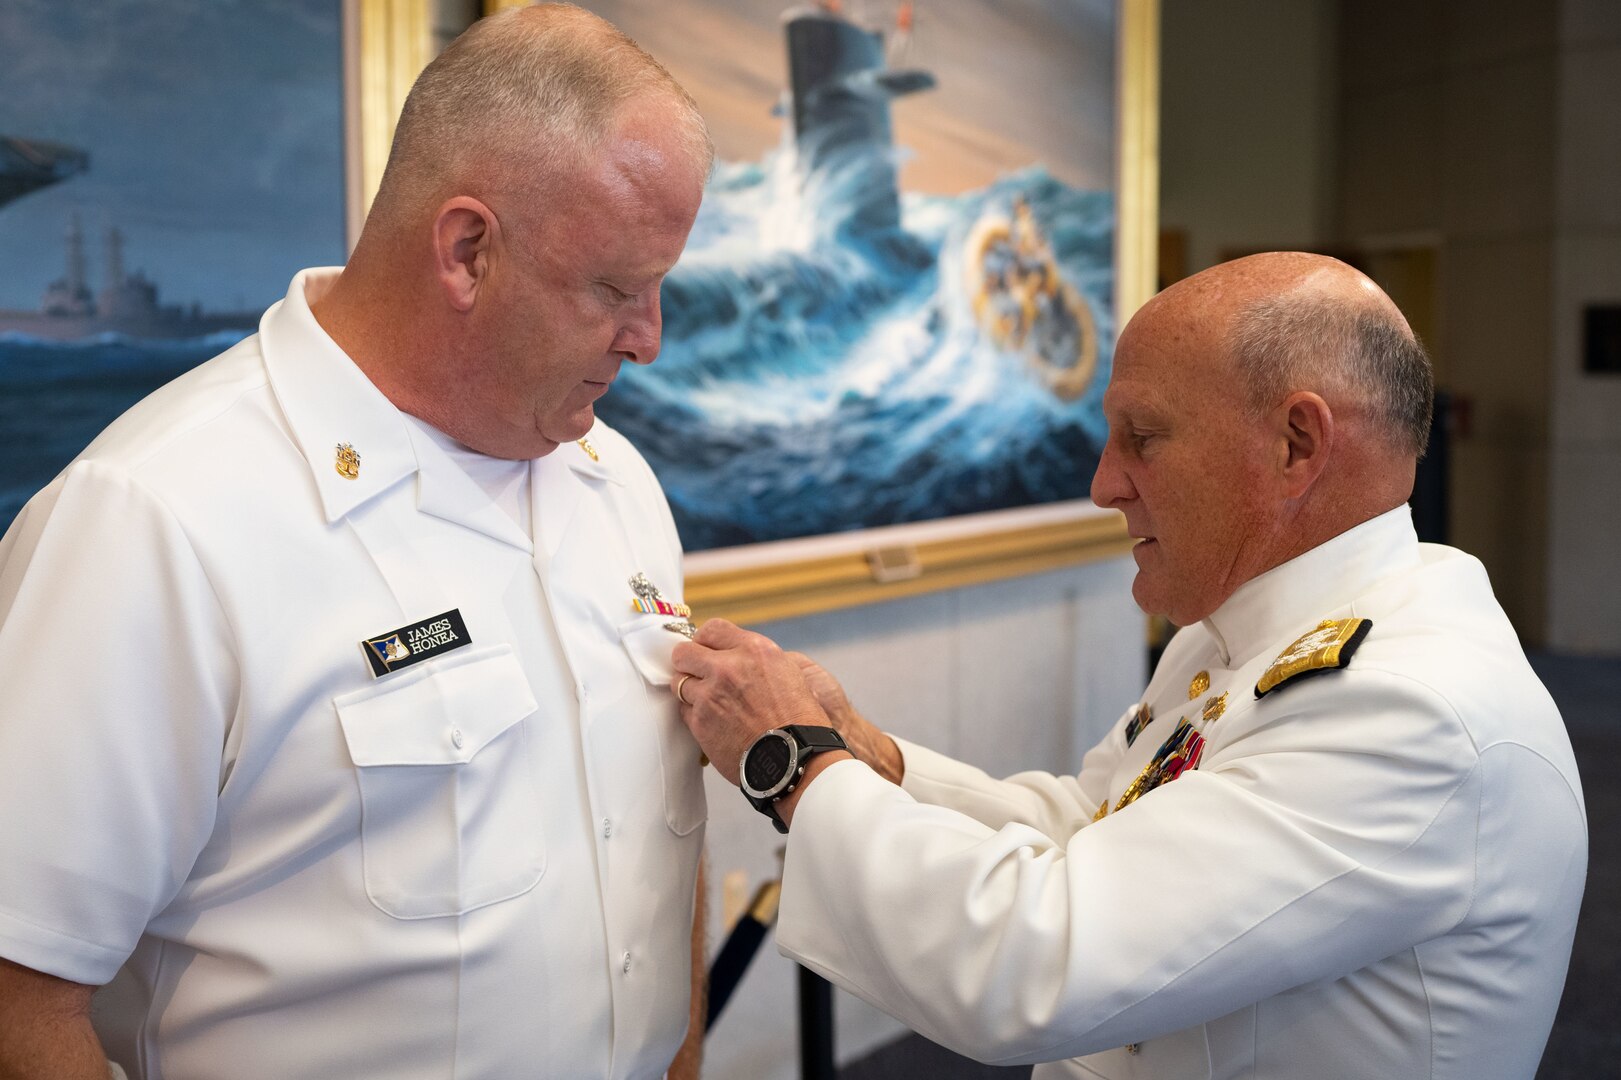 Chief of Naval Operations Adm. Mike Gilday pins Master Chief Petty Officer of the Navy (MCPON) James Honea’s identification badge after delivering the oath of enlistment before the MCPON Change of Office ceremony held at Mahan Hall, United States Naval Academy, Sept. 8, 2022.